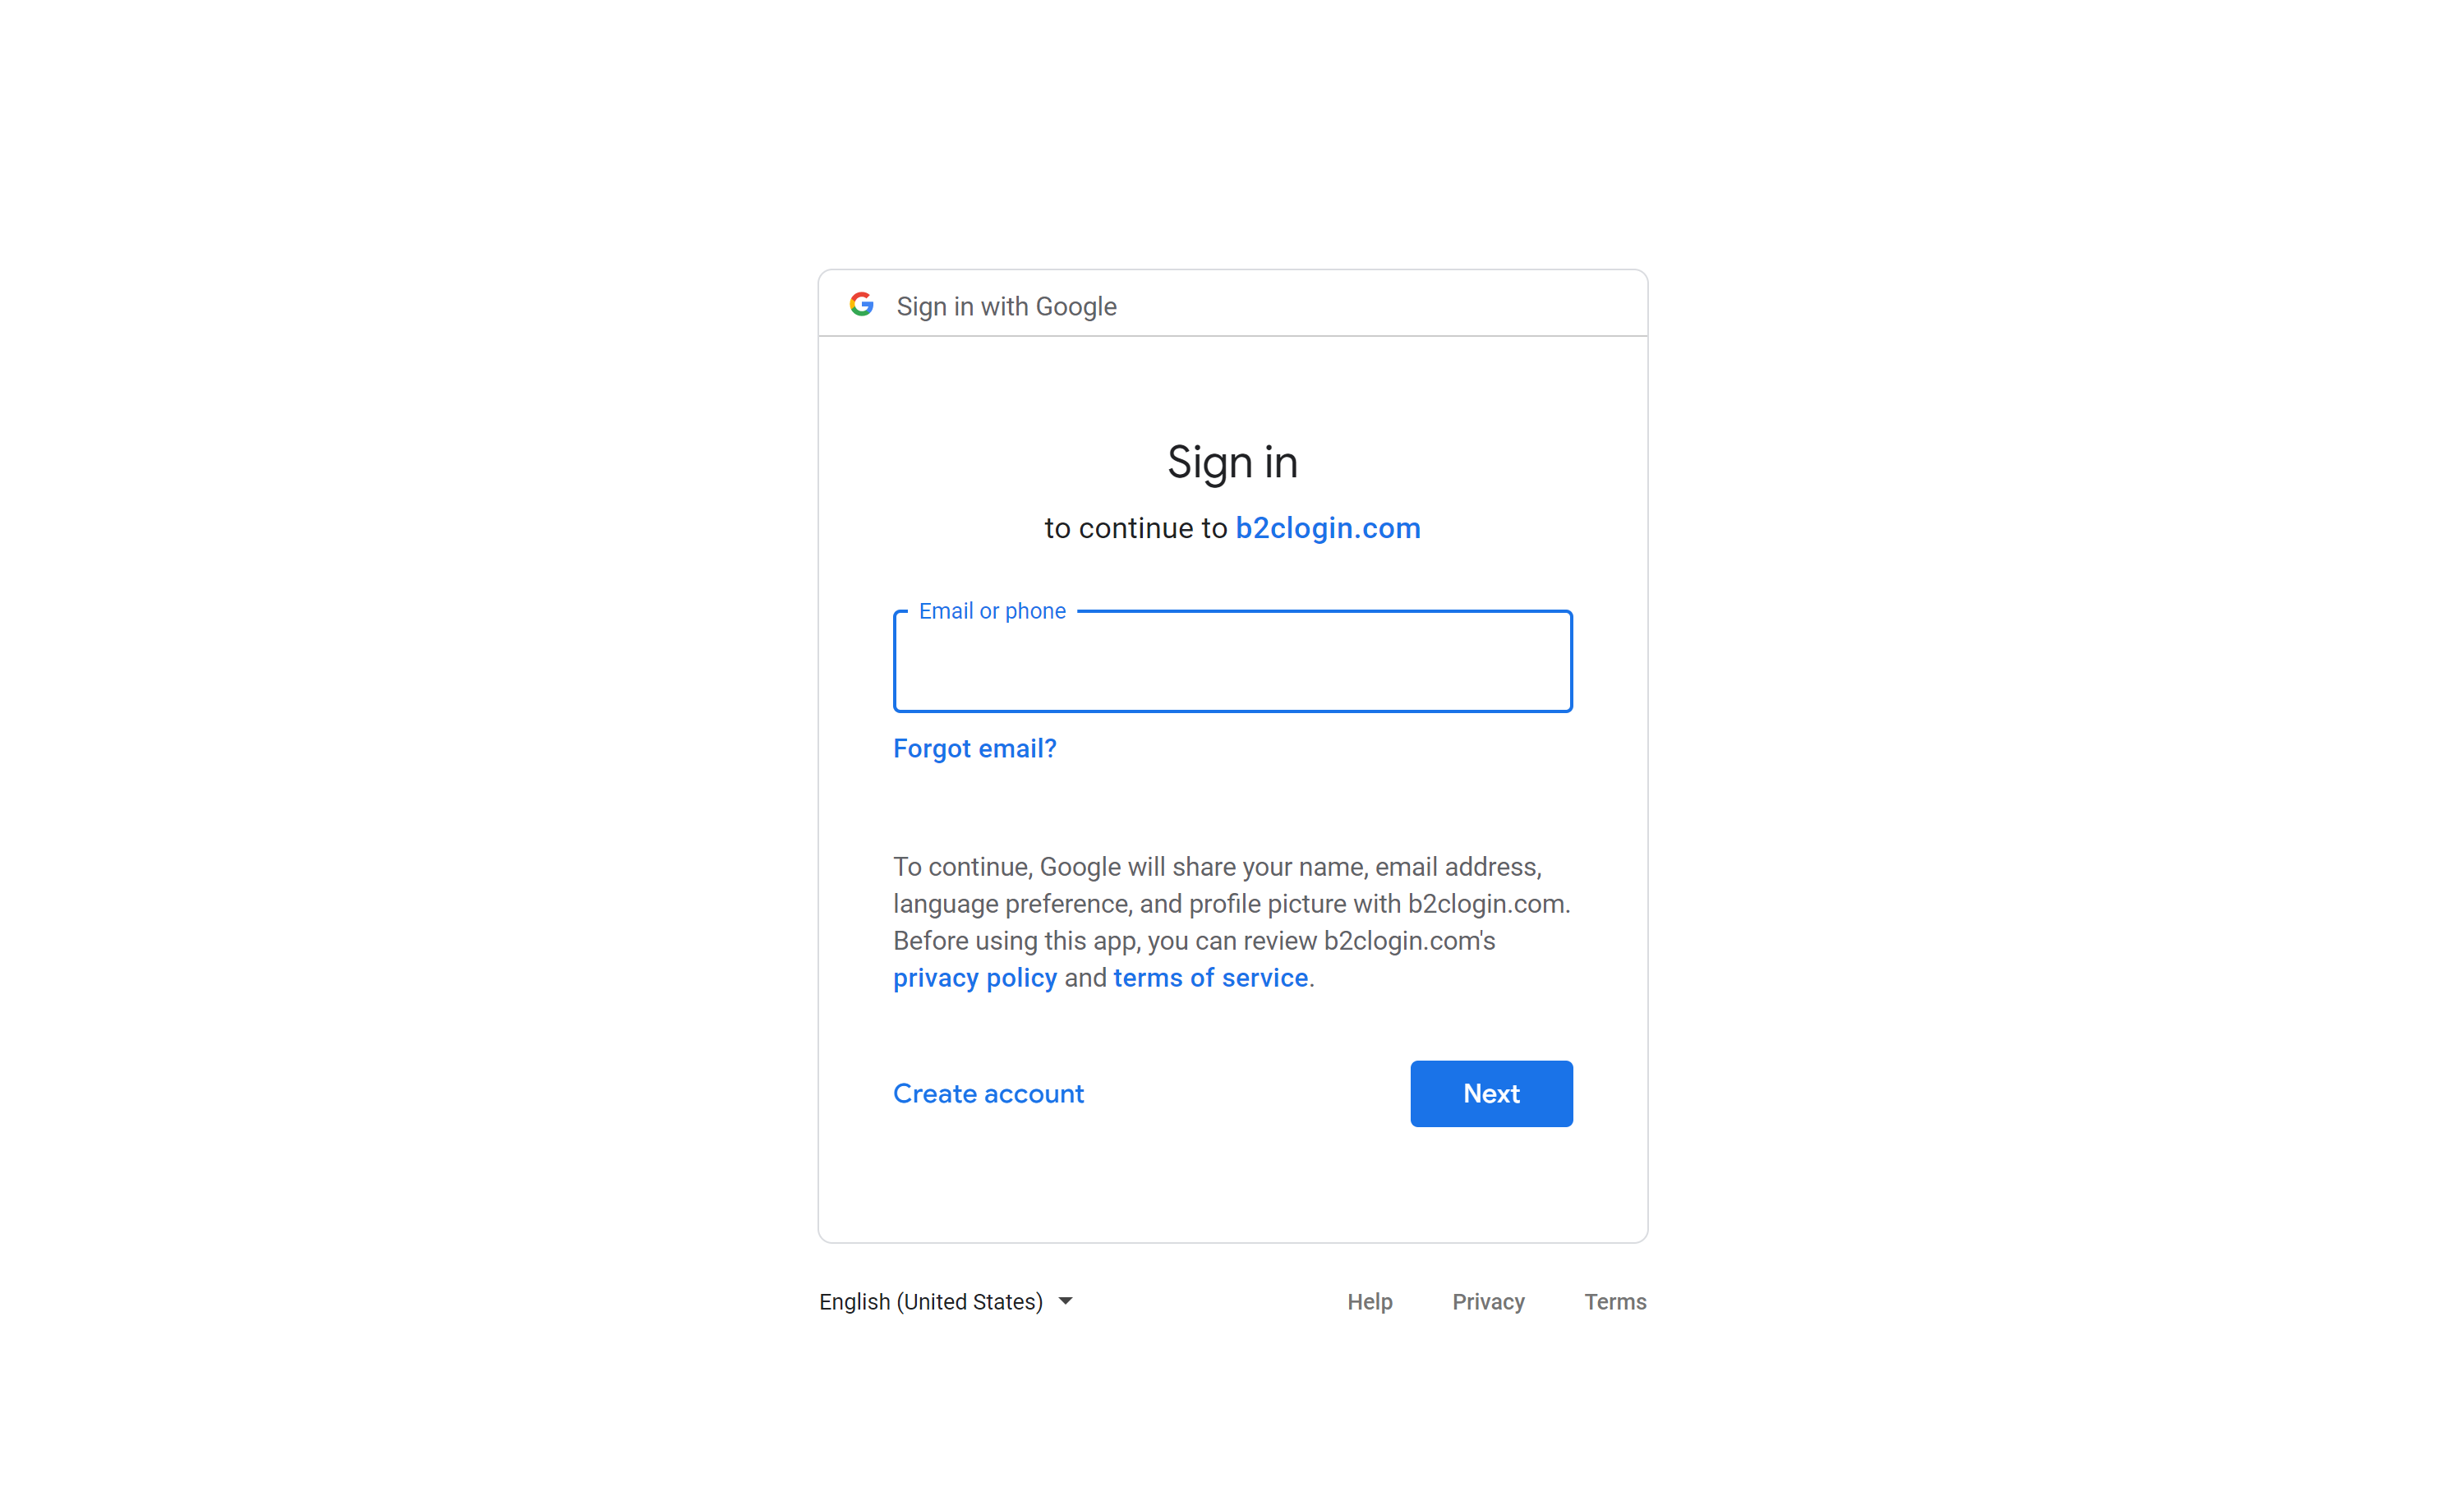 Sign in with Google screen.